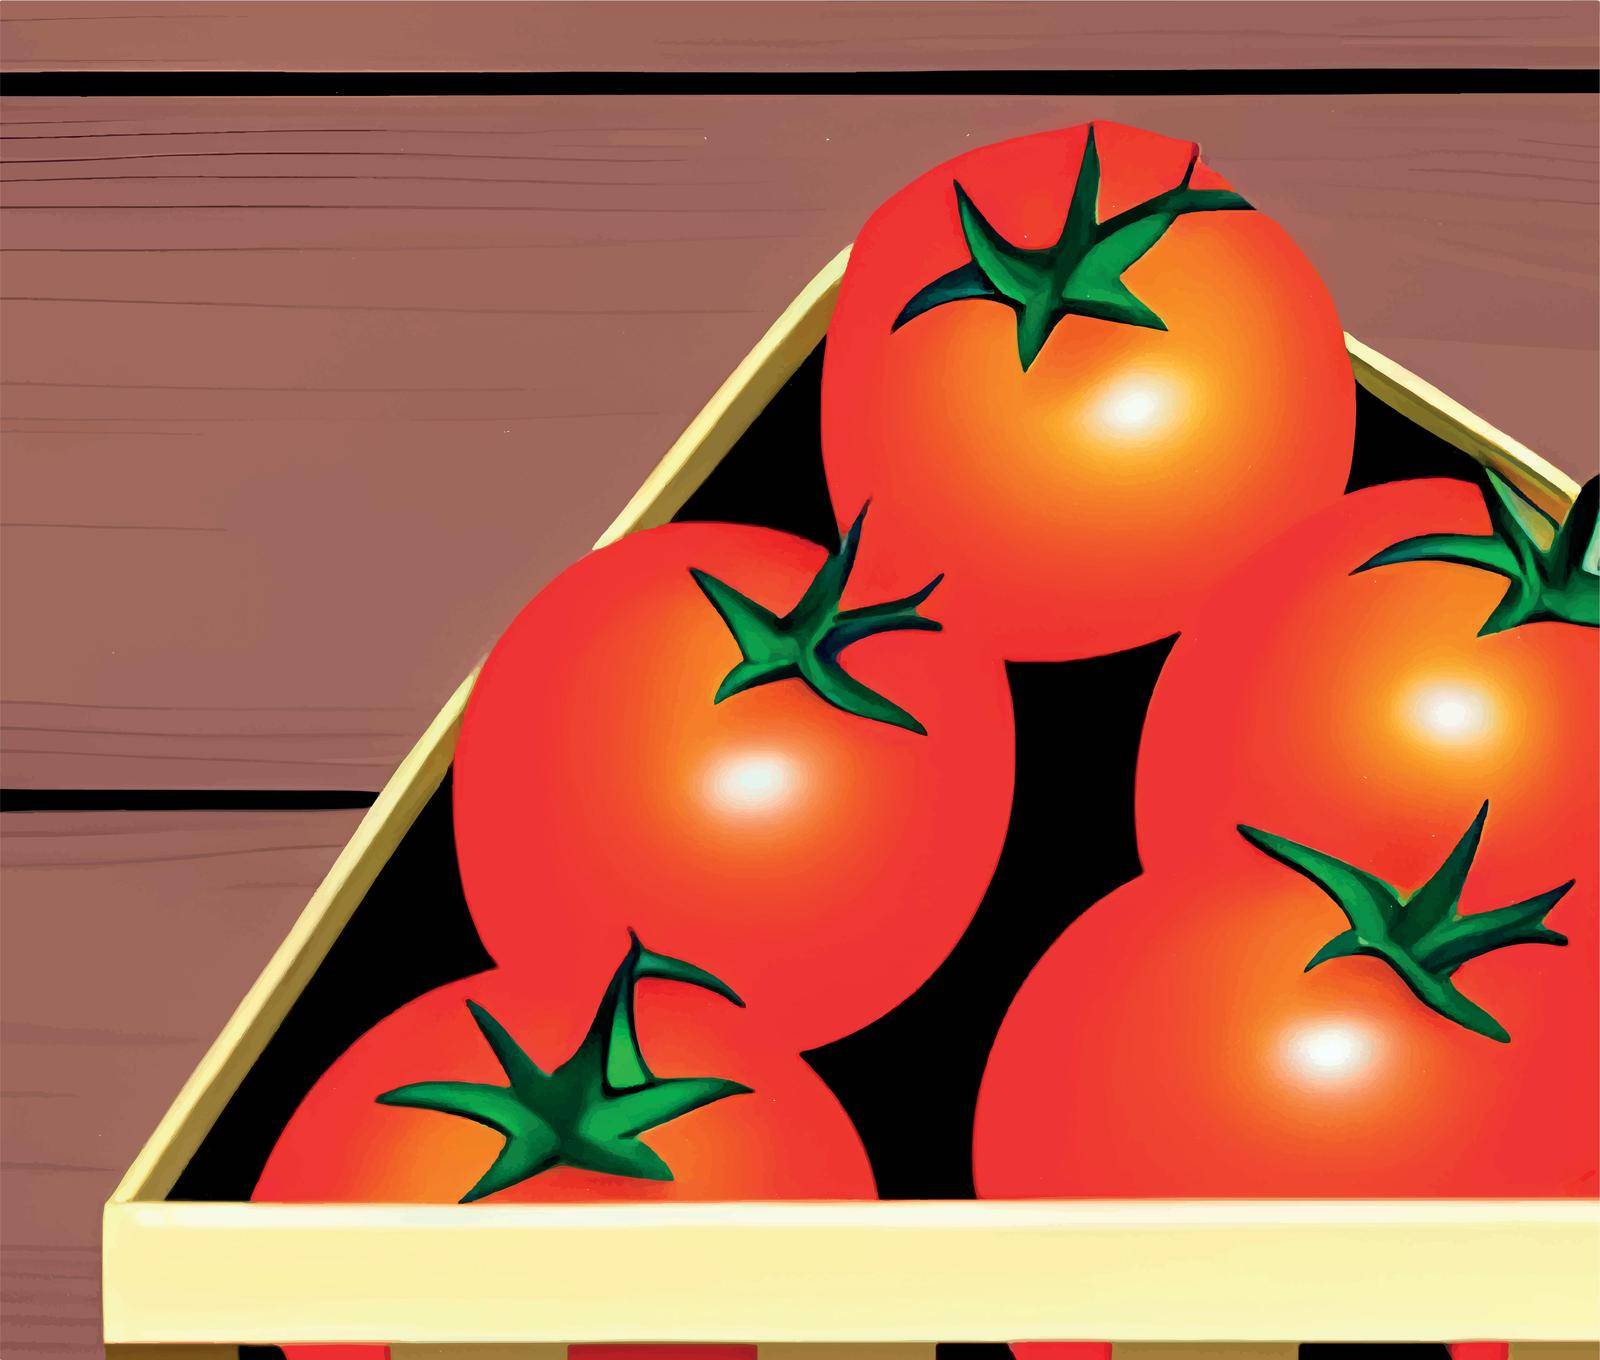 close up tomatoes in a box